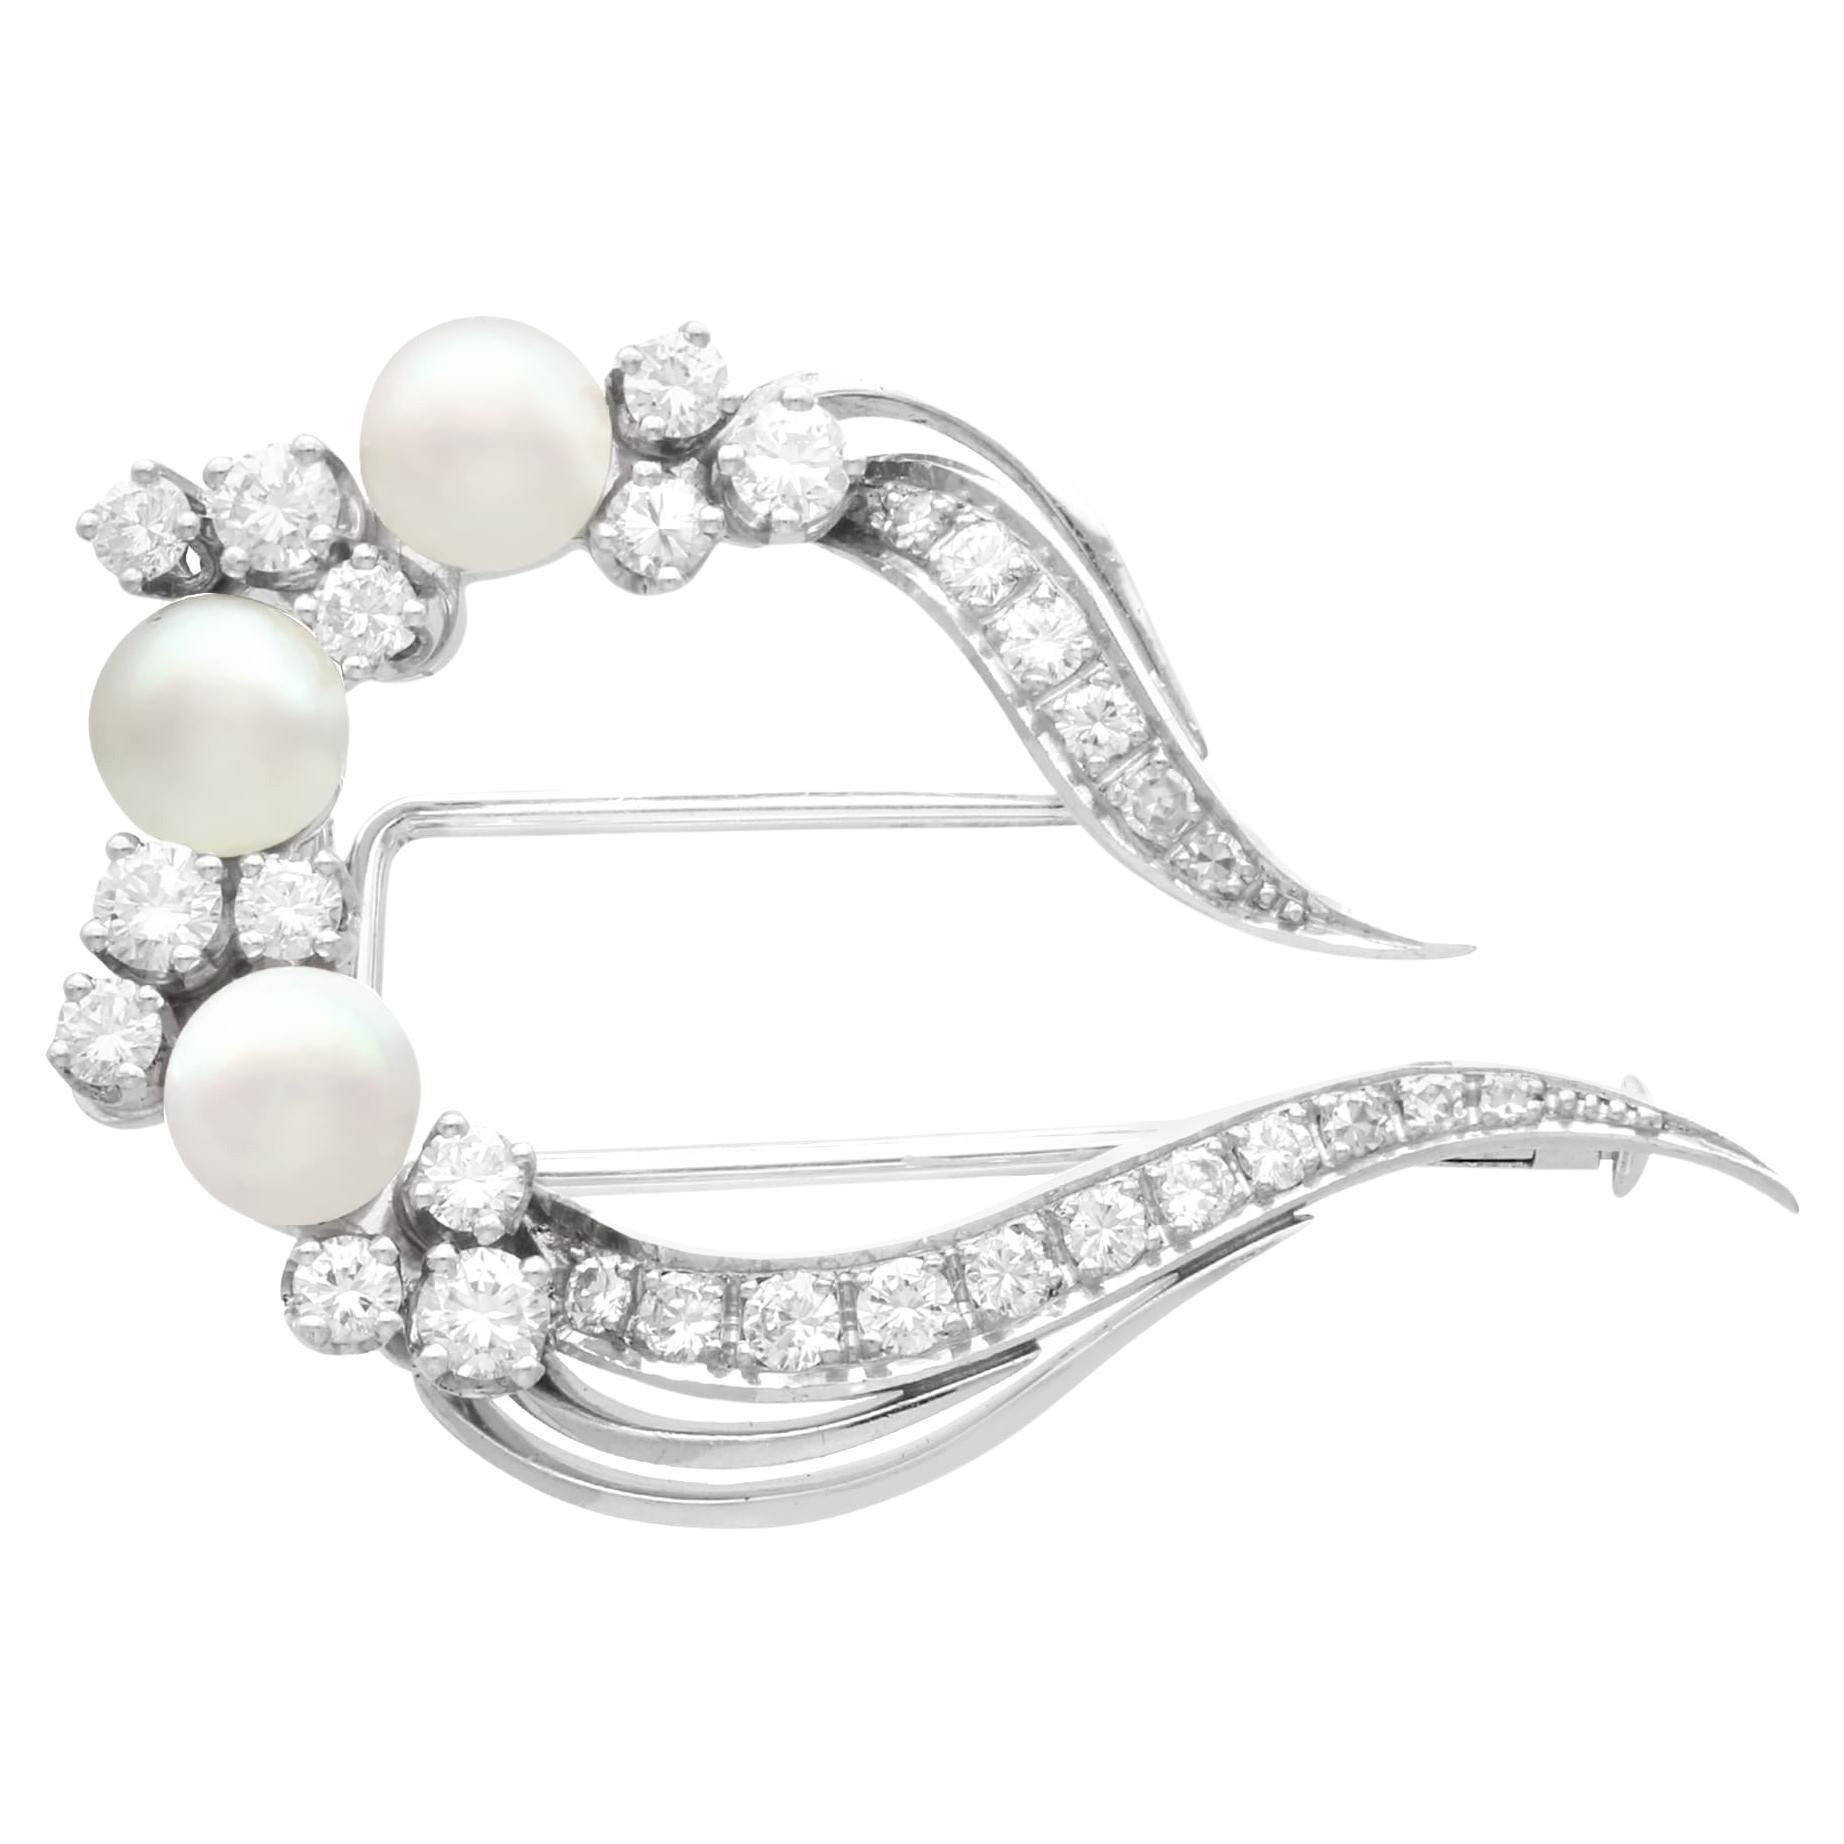 Vintage 1960s Cultured Pearl and 1.15 Carat Diamond 18k White Gold Brooch